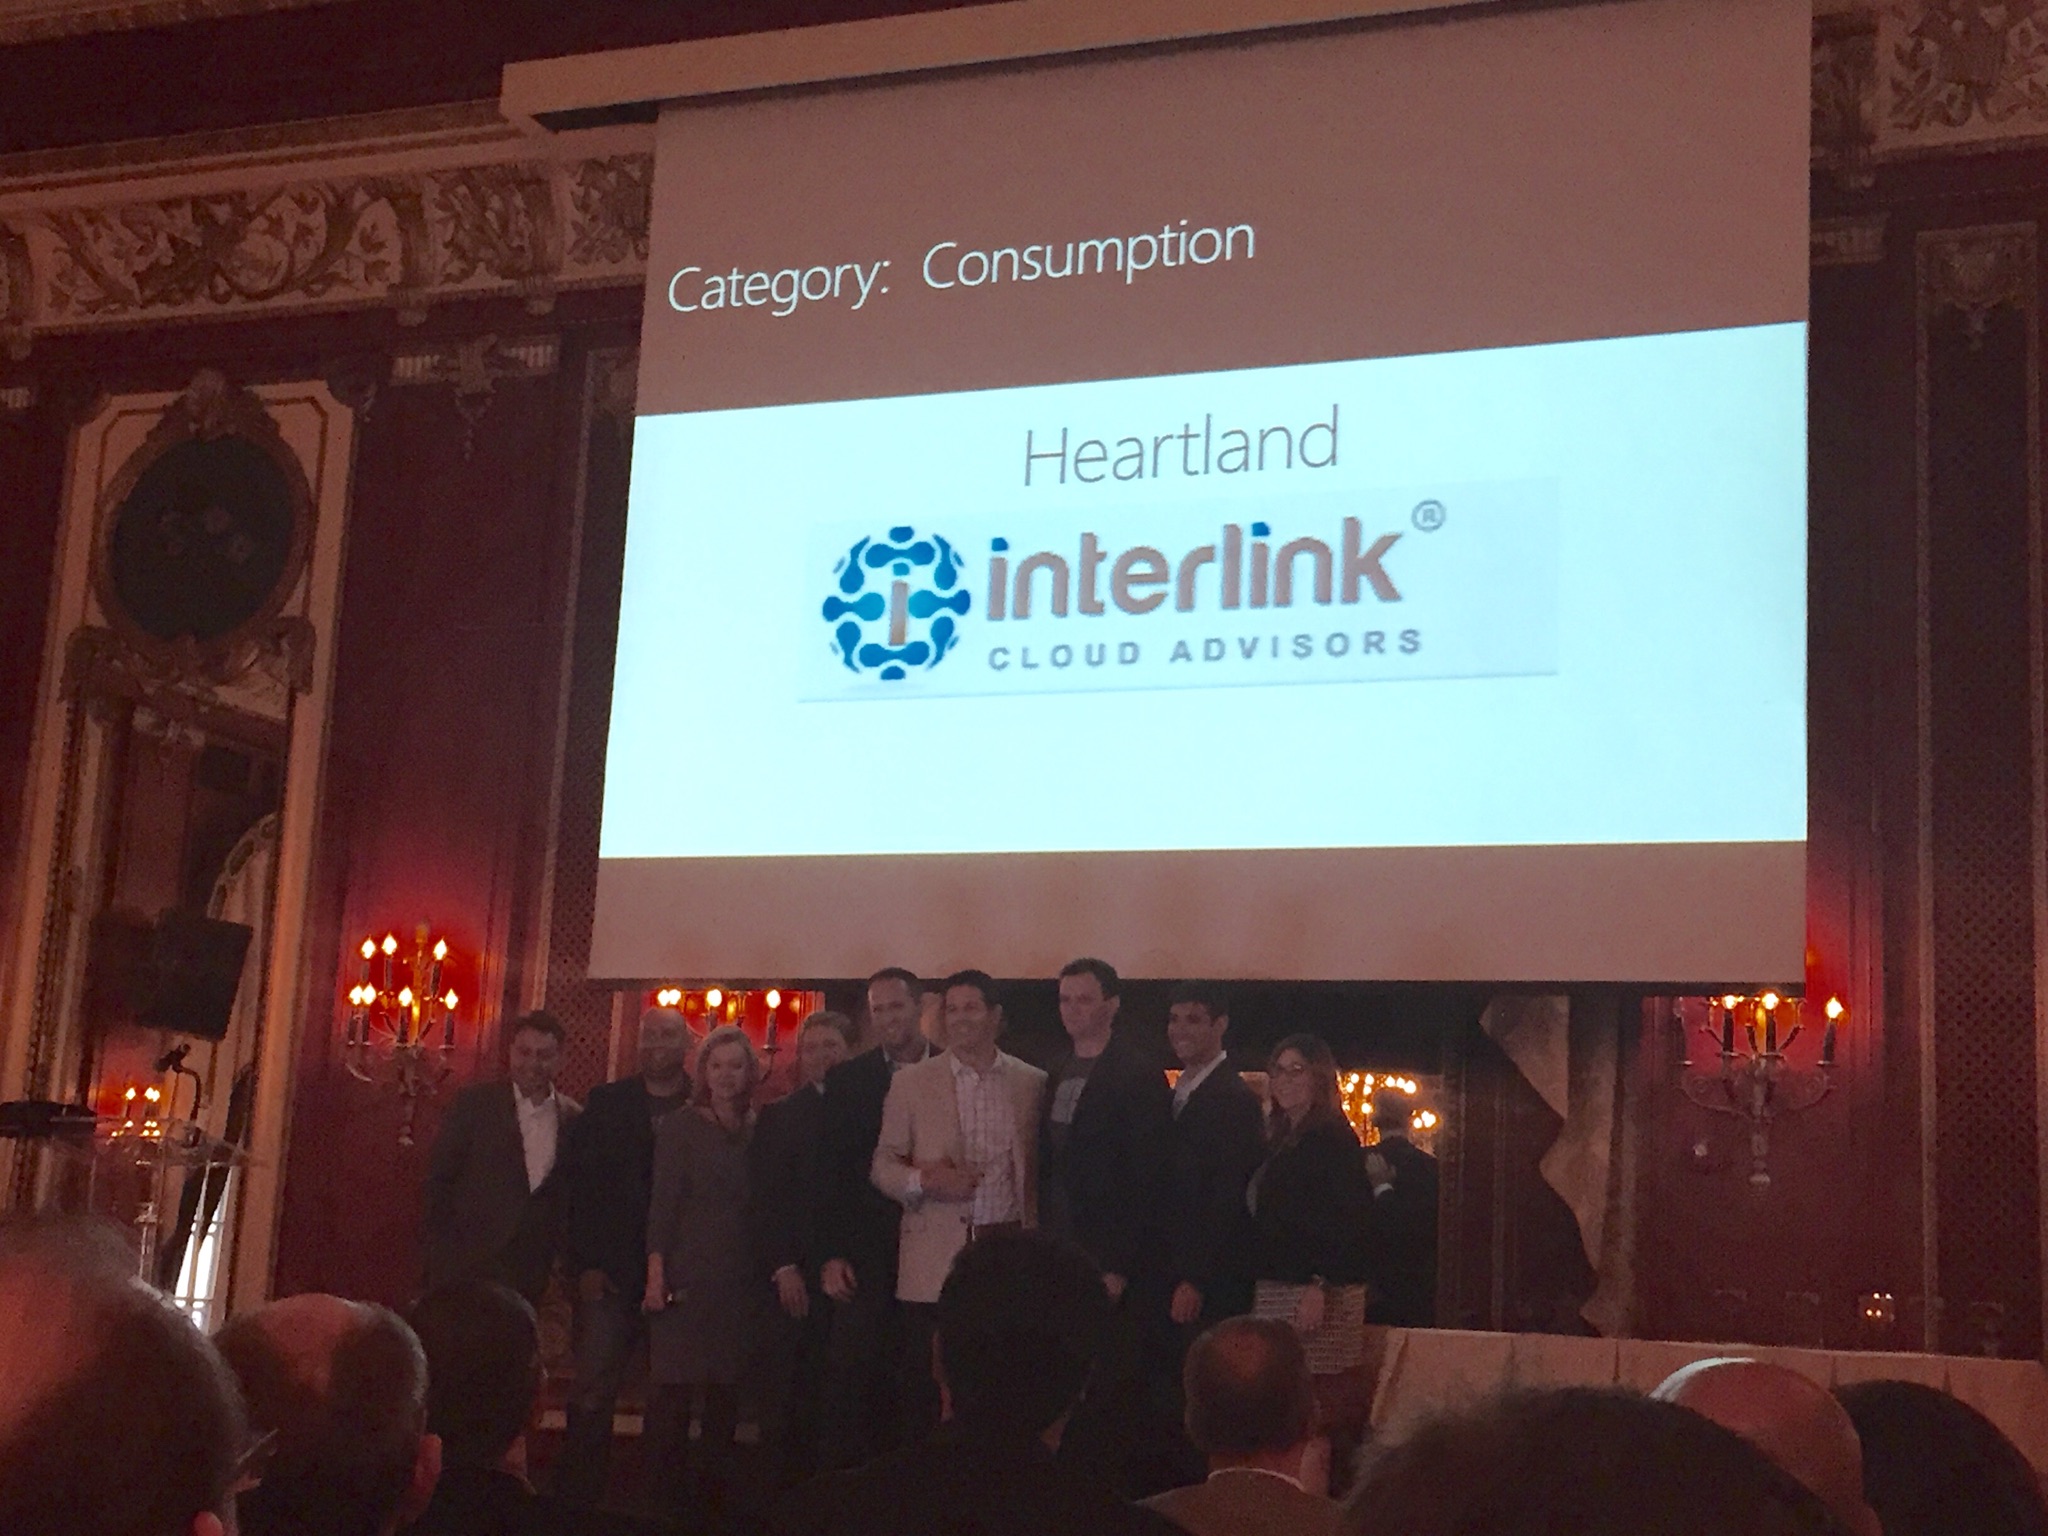 Microsoft Awards Interlink For Top Consumption Use of Office 365